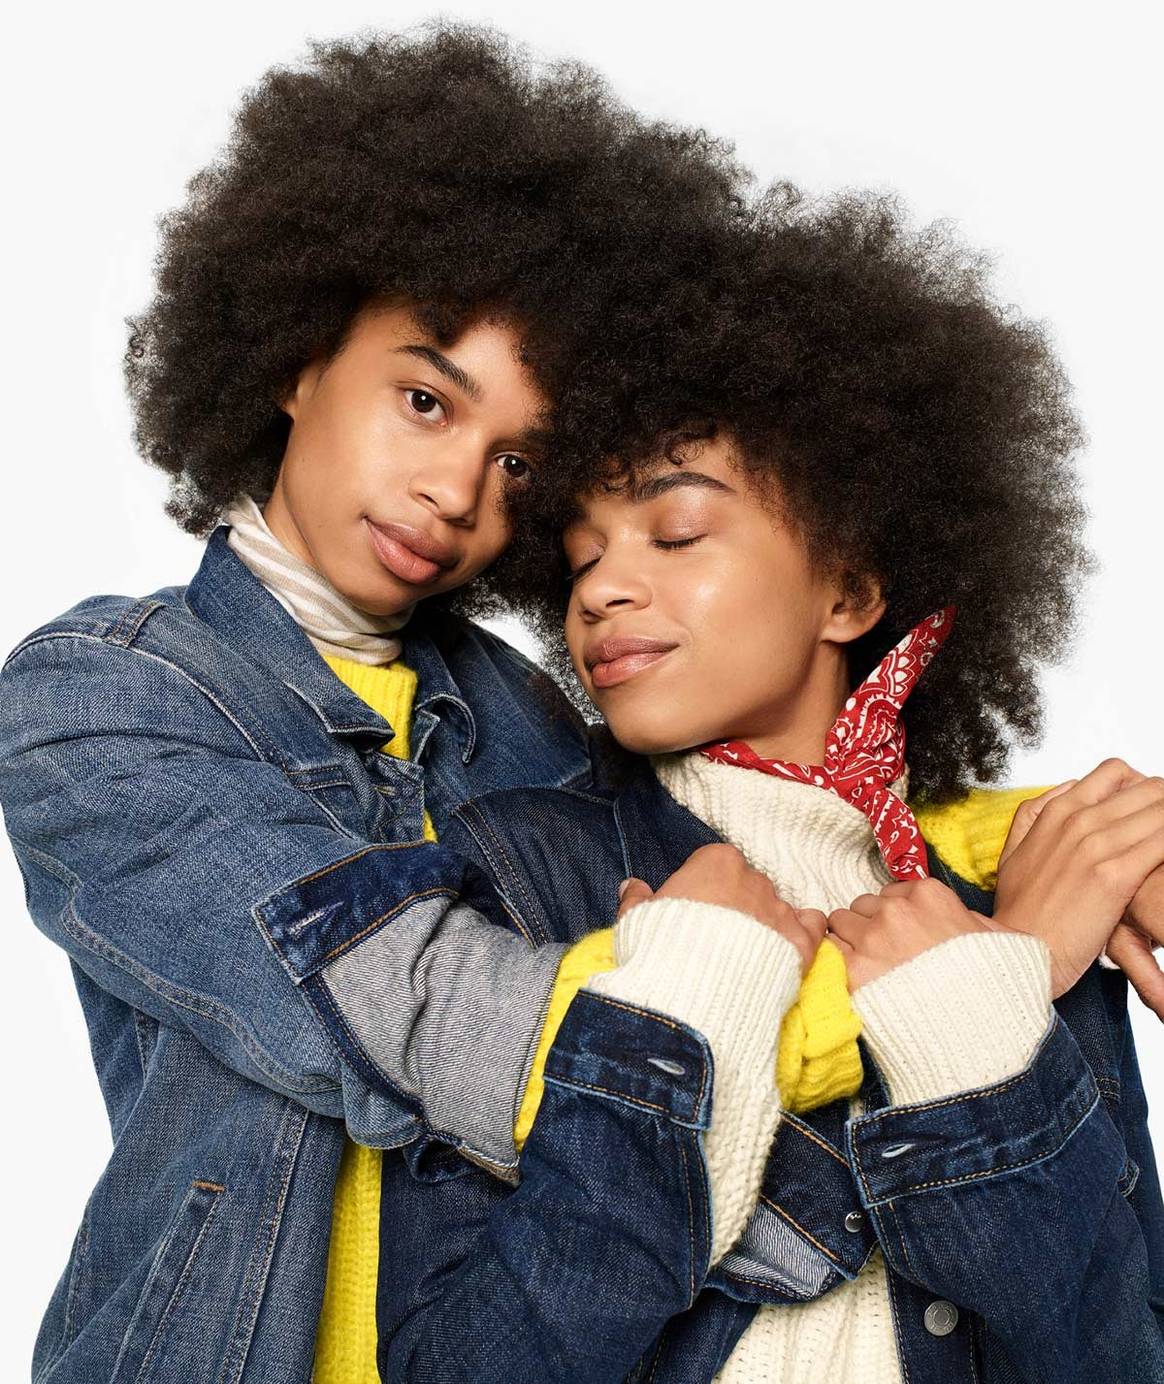 Gap dévoile sa campagne de communication « Gift the Thought »